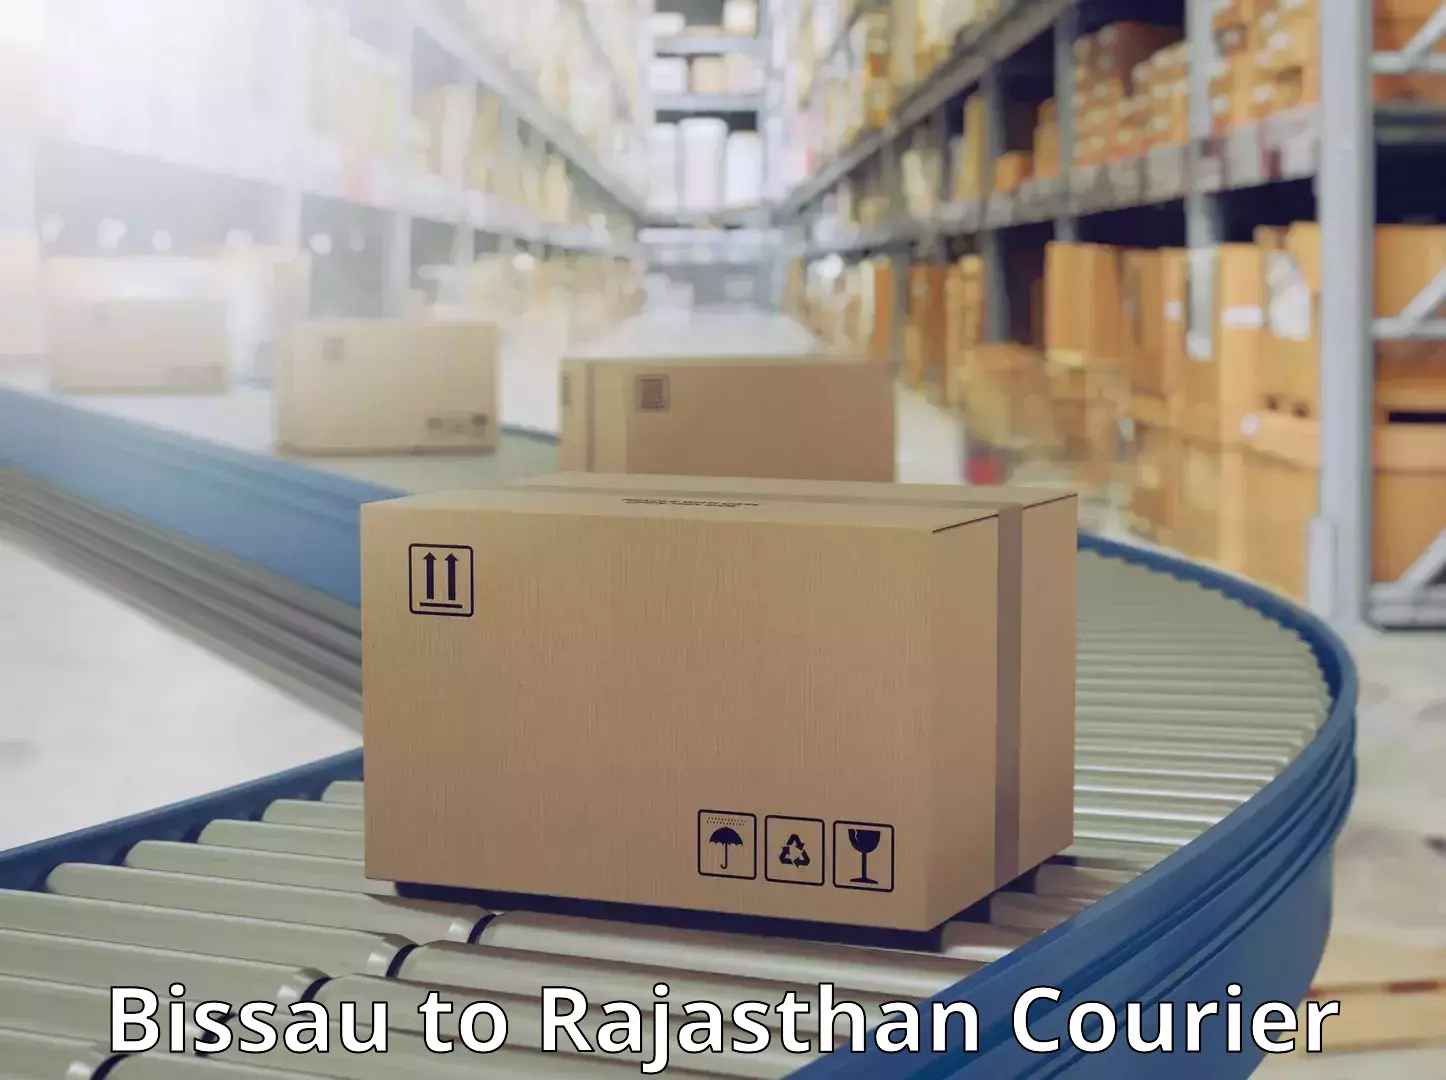 State-of-the-art courier technology Bissau to Jodhpur